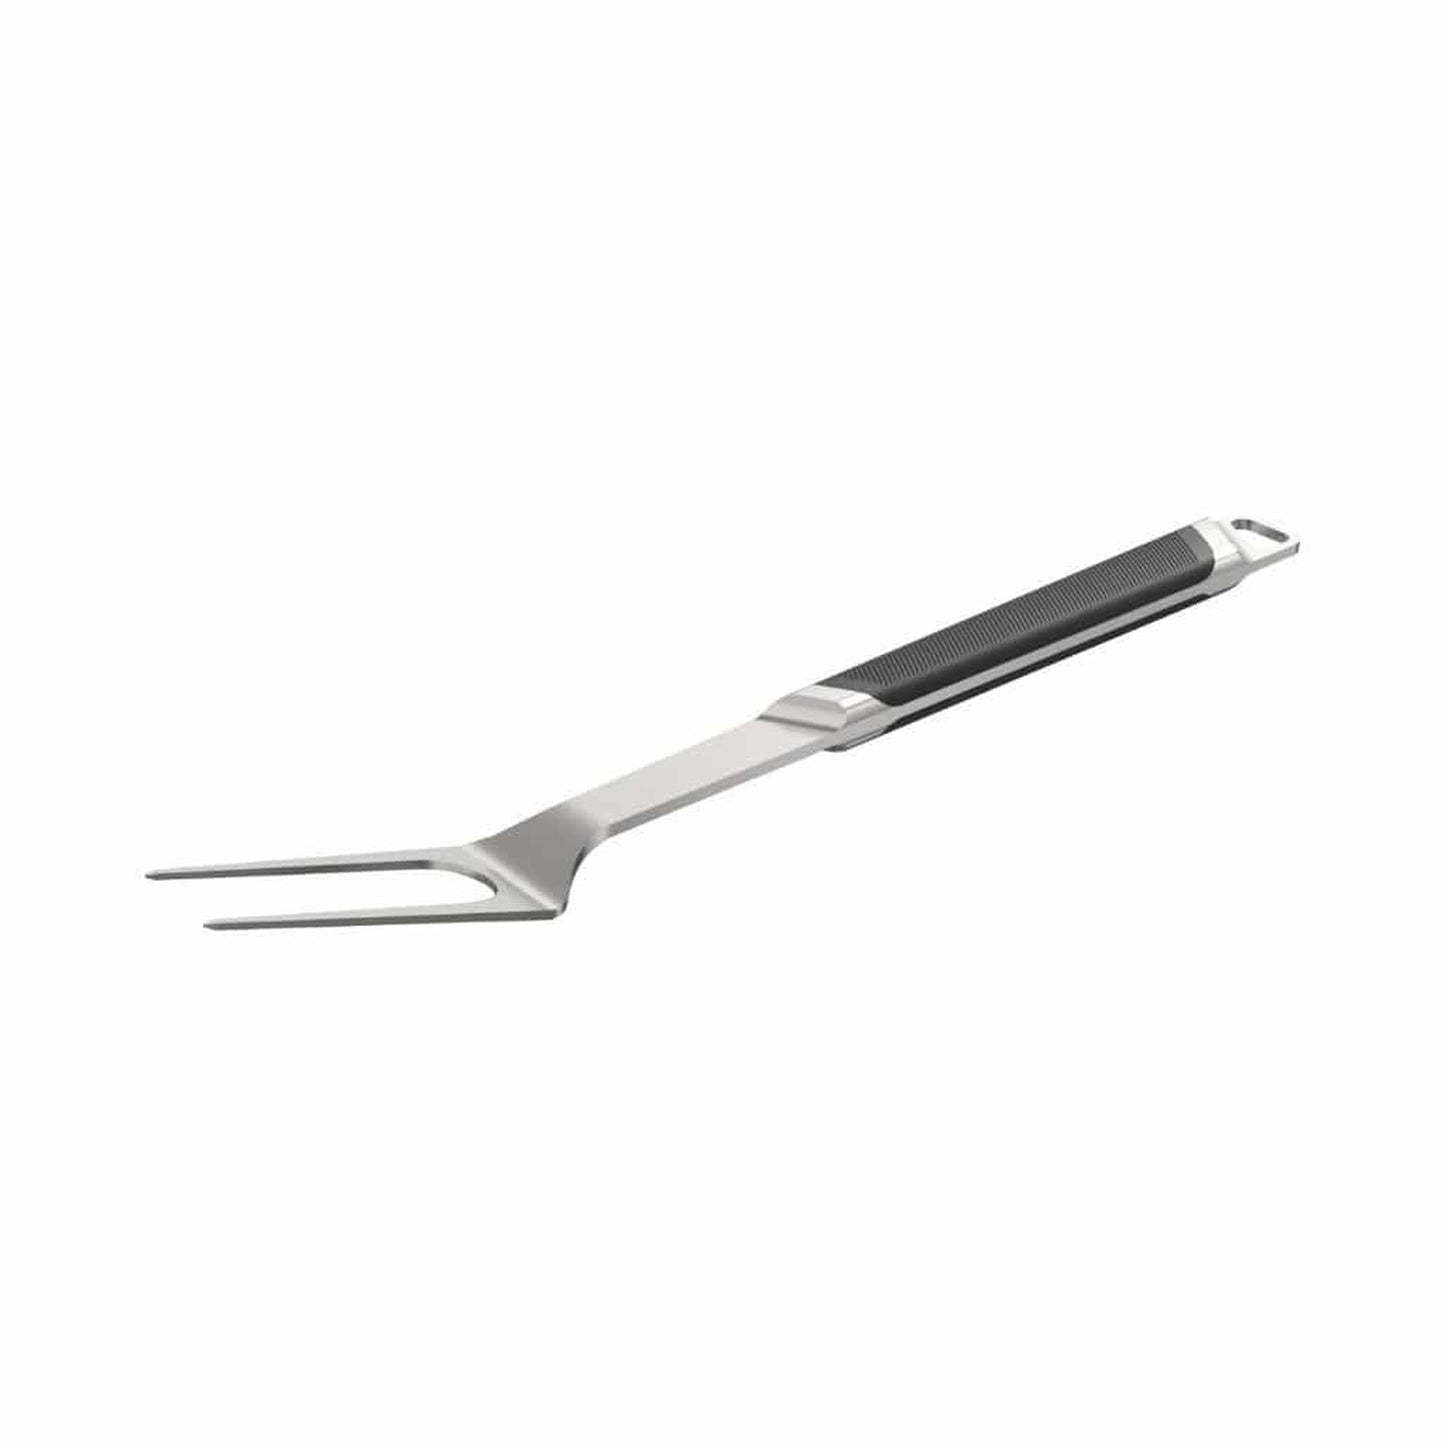 Everdure Large Premium Stainless Steel Fork with Soft Grip